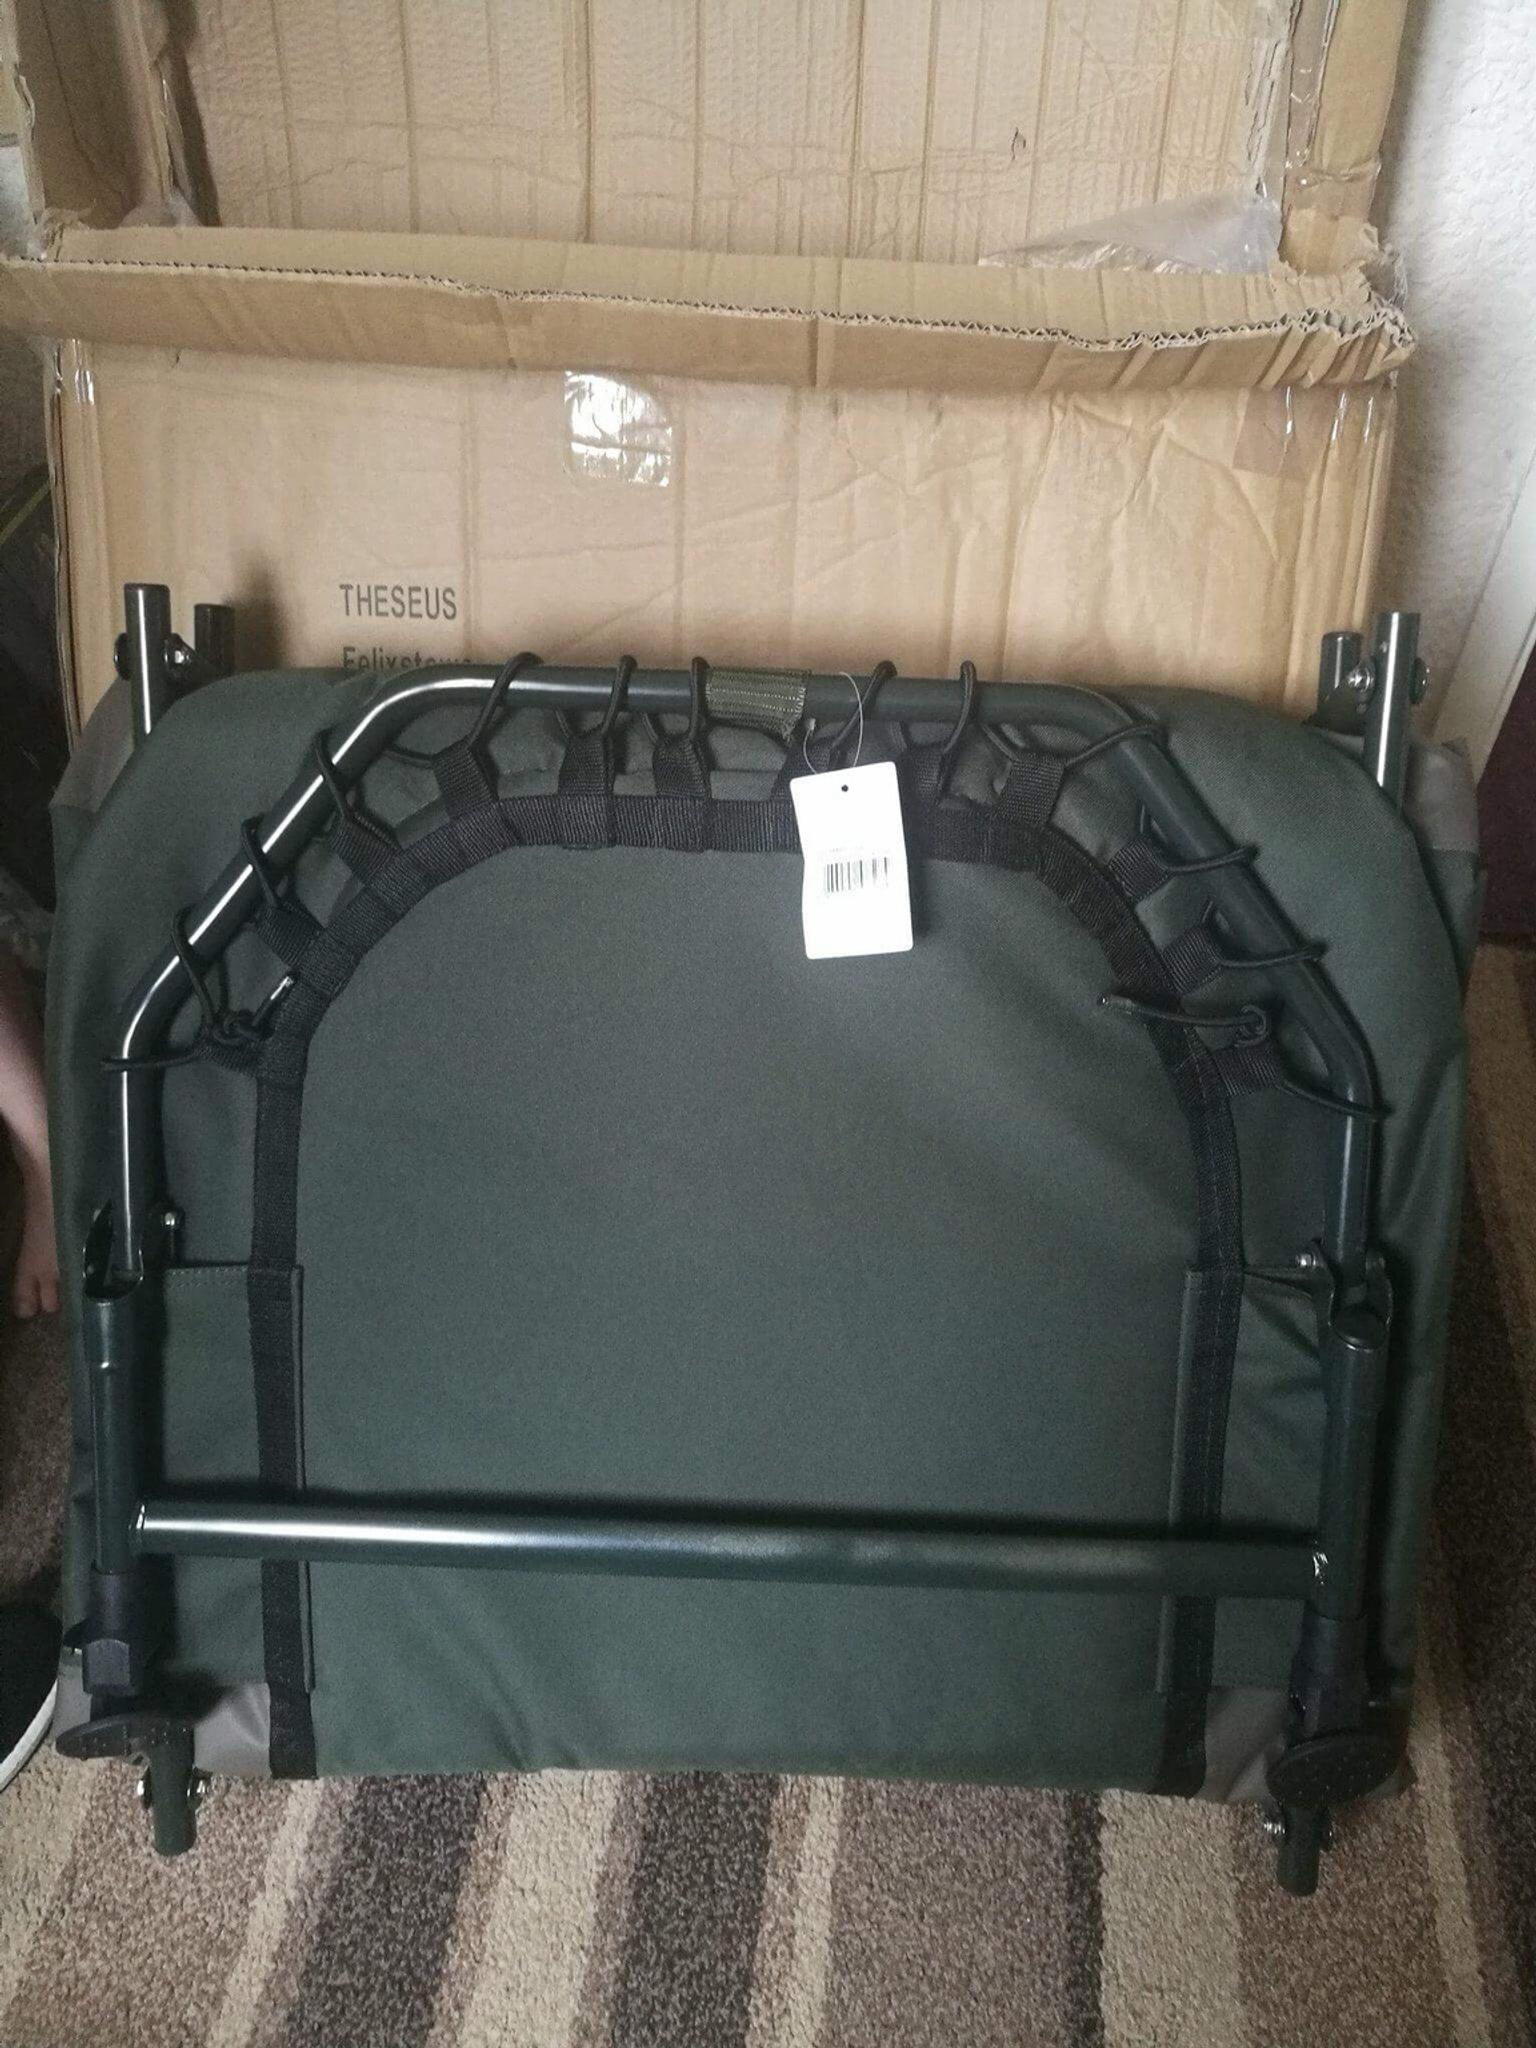 Carp Bed Chair And Sleeping Bag For Sale In Woodham For 40 00 For